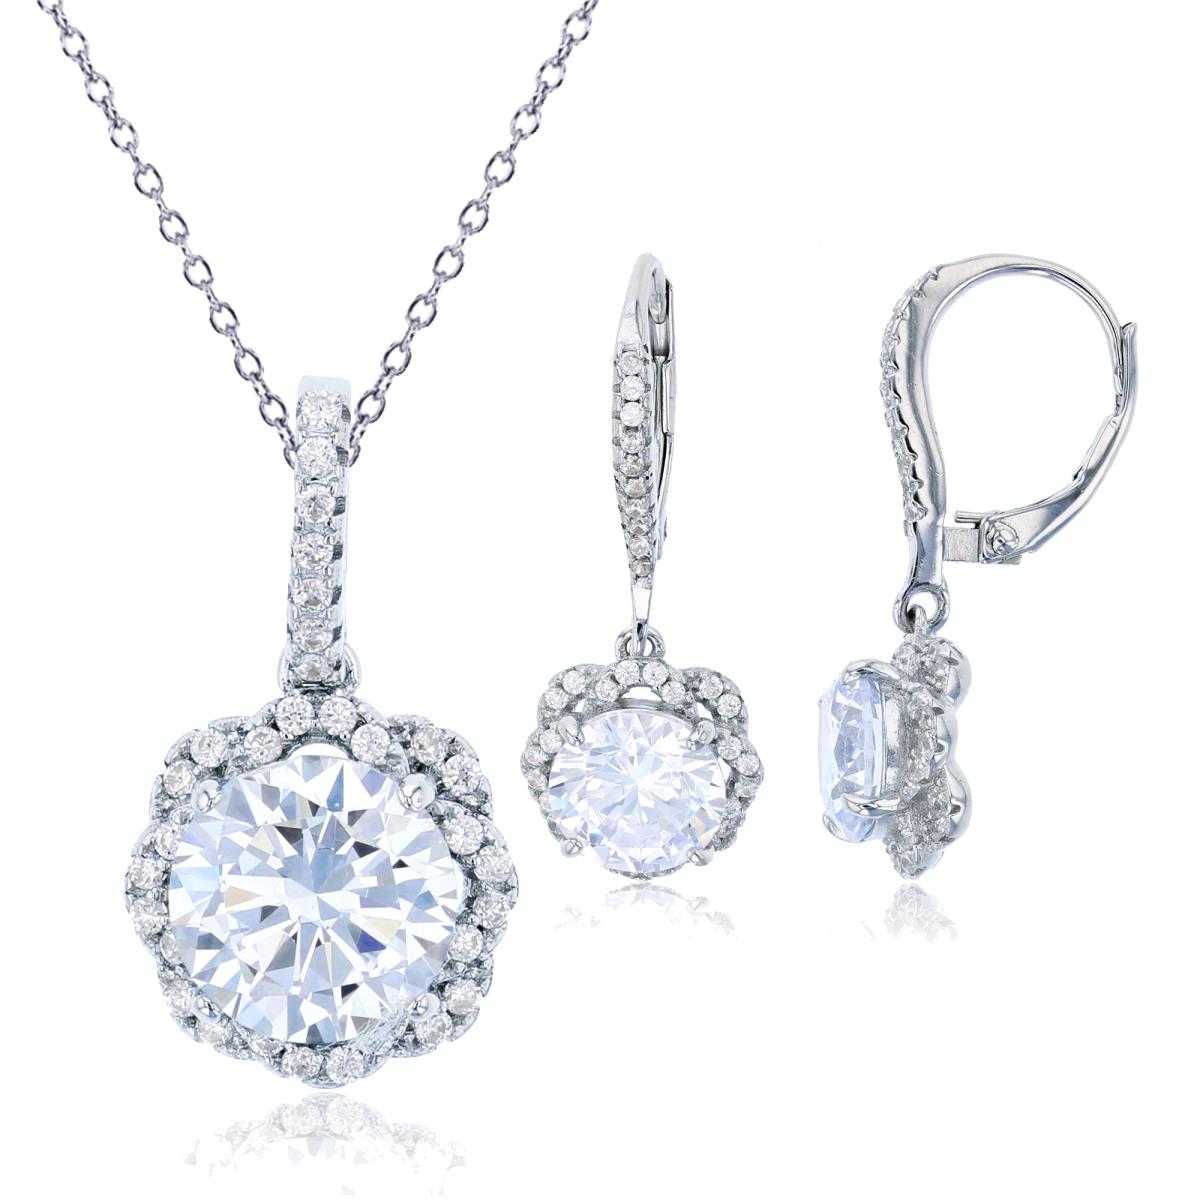 Sterling Silver Rhodium Pave 8mm Halo Round Cut Flower Dangling Earring and 18" Necklace Set